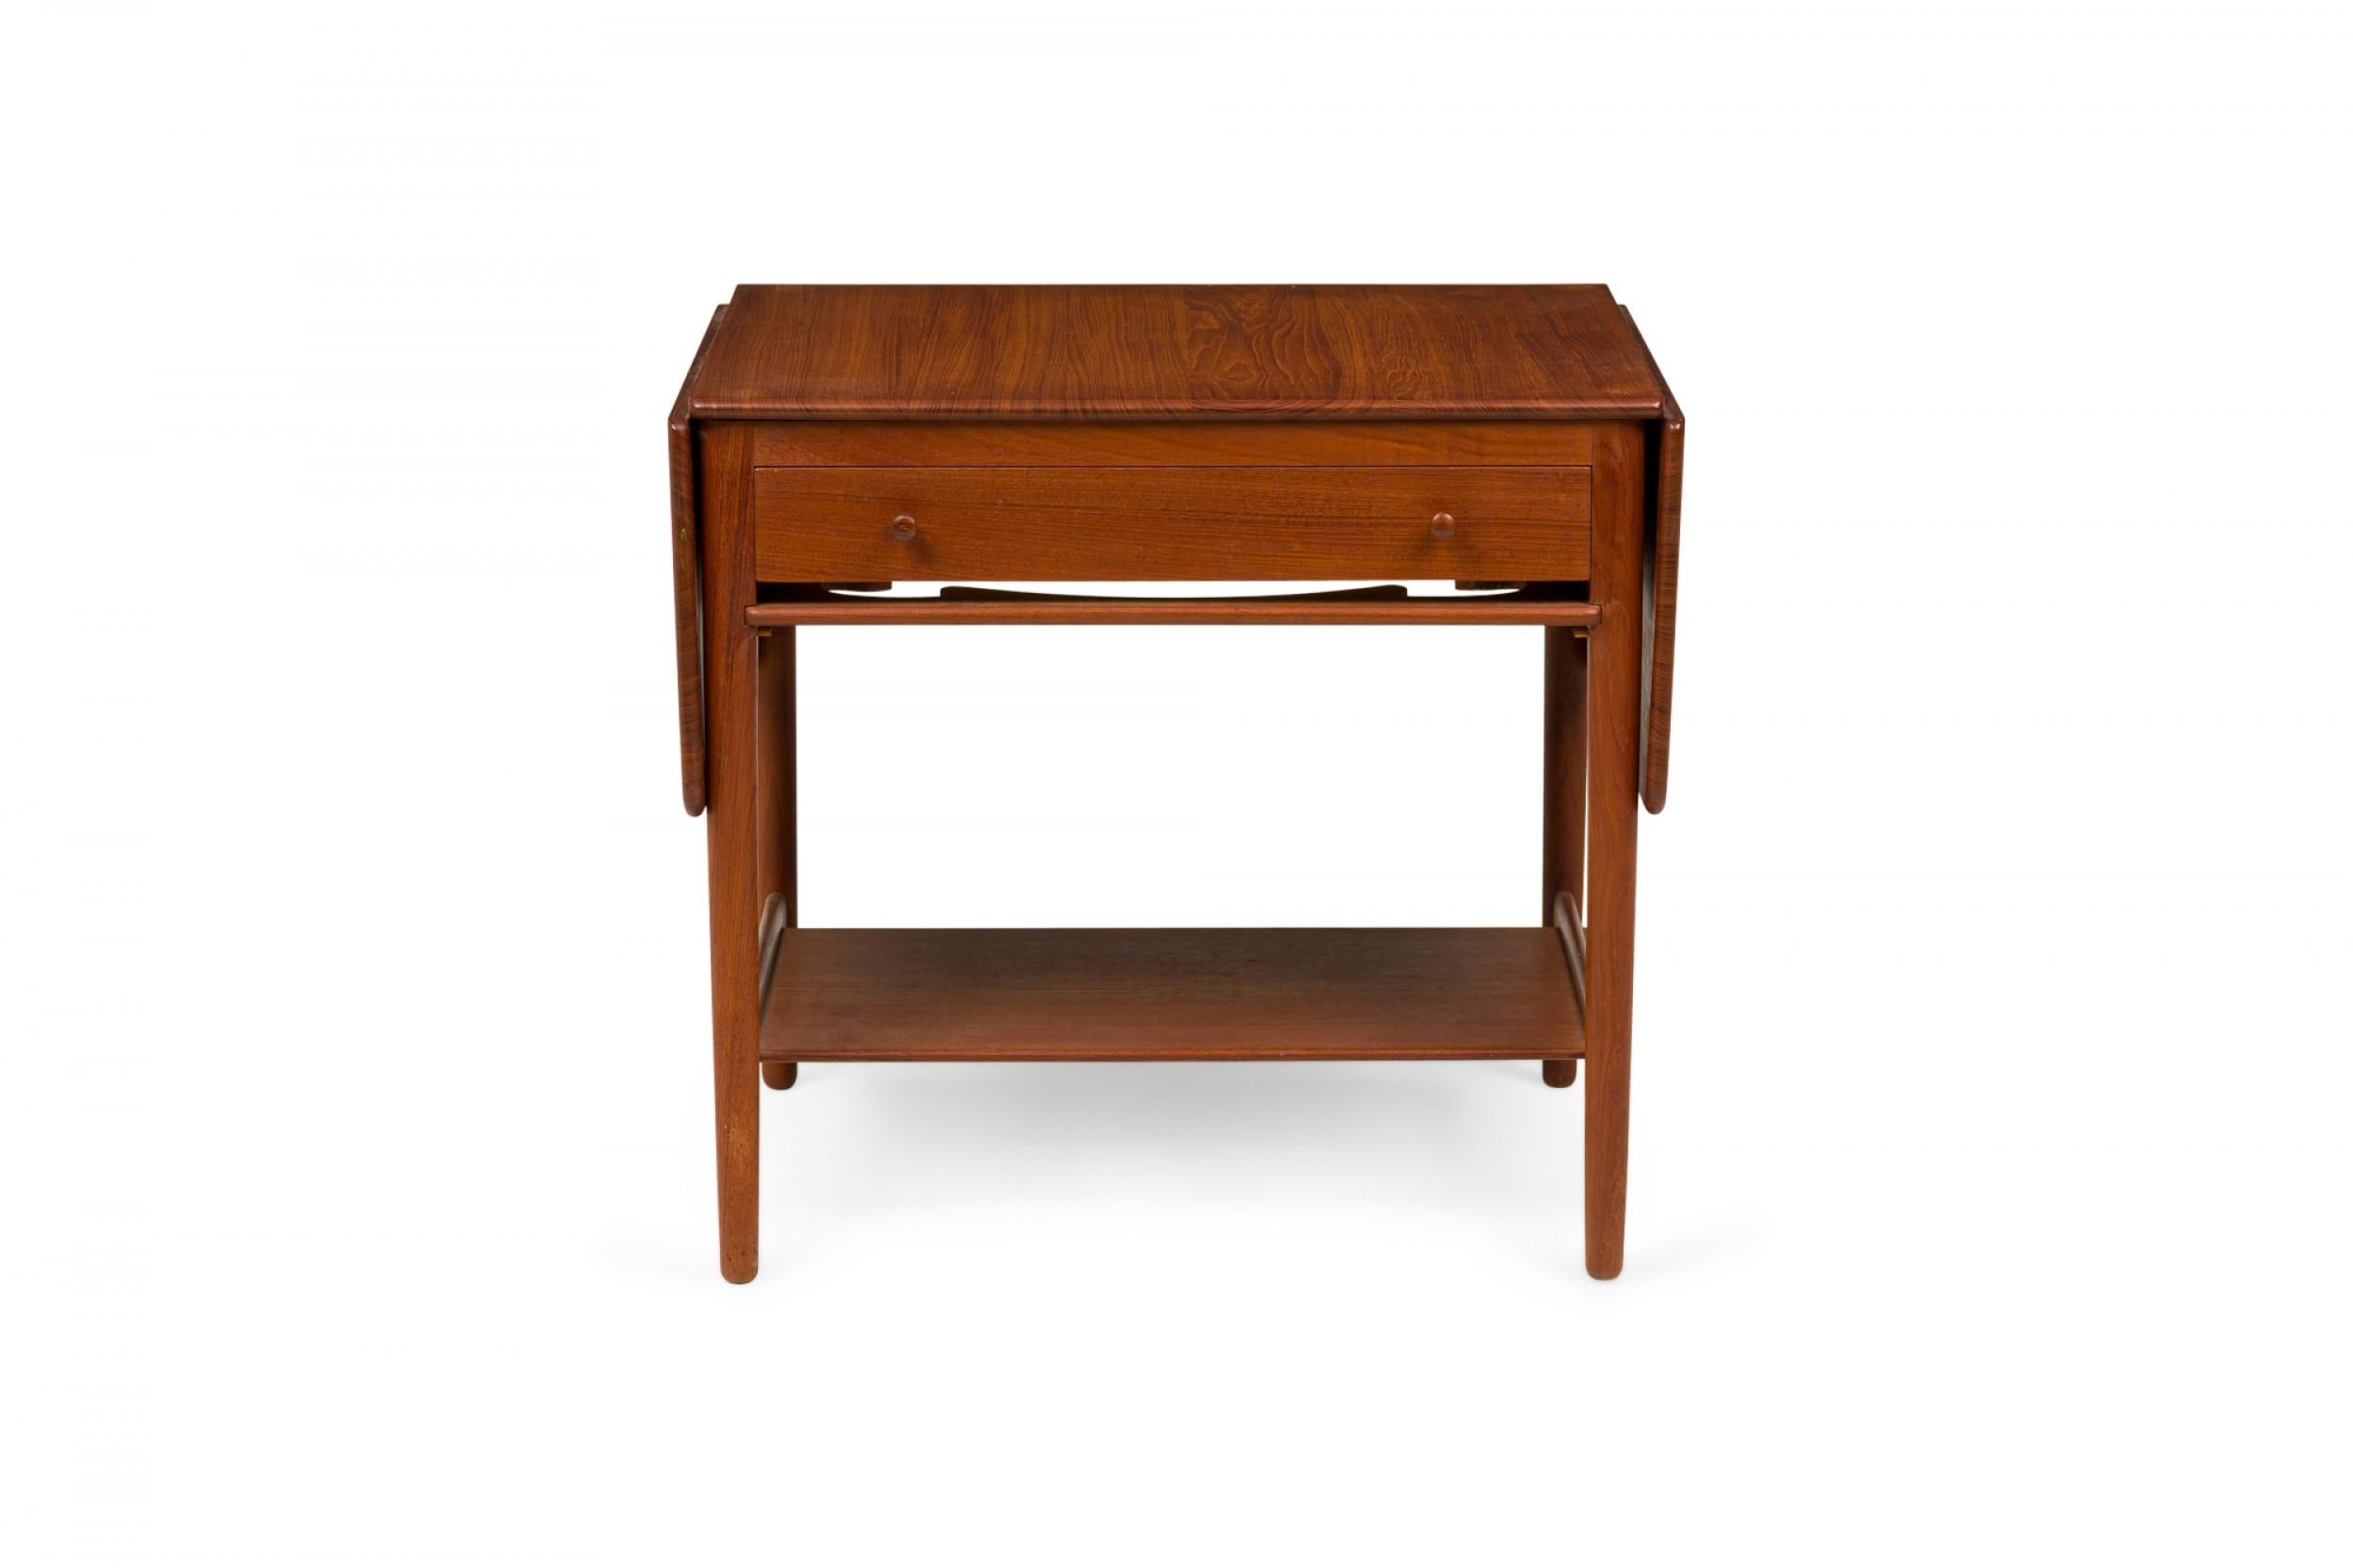 American Mid-Century teak wood sewing table with two drop leaves on either side, a single drawer with two wooden knob drawer pulls, and a sliding compartment with room for a basket over a smaller stretcher shelf connecting four tapered dowel legs.